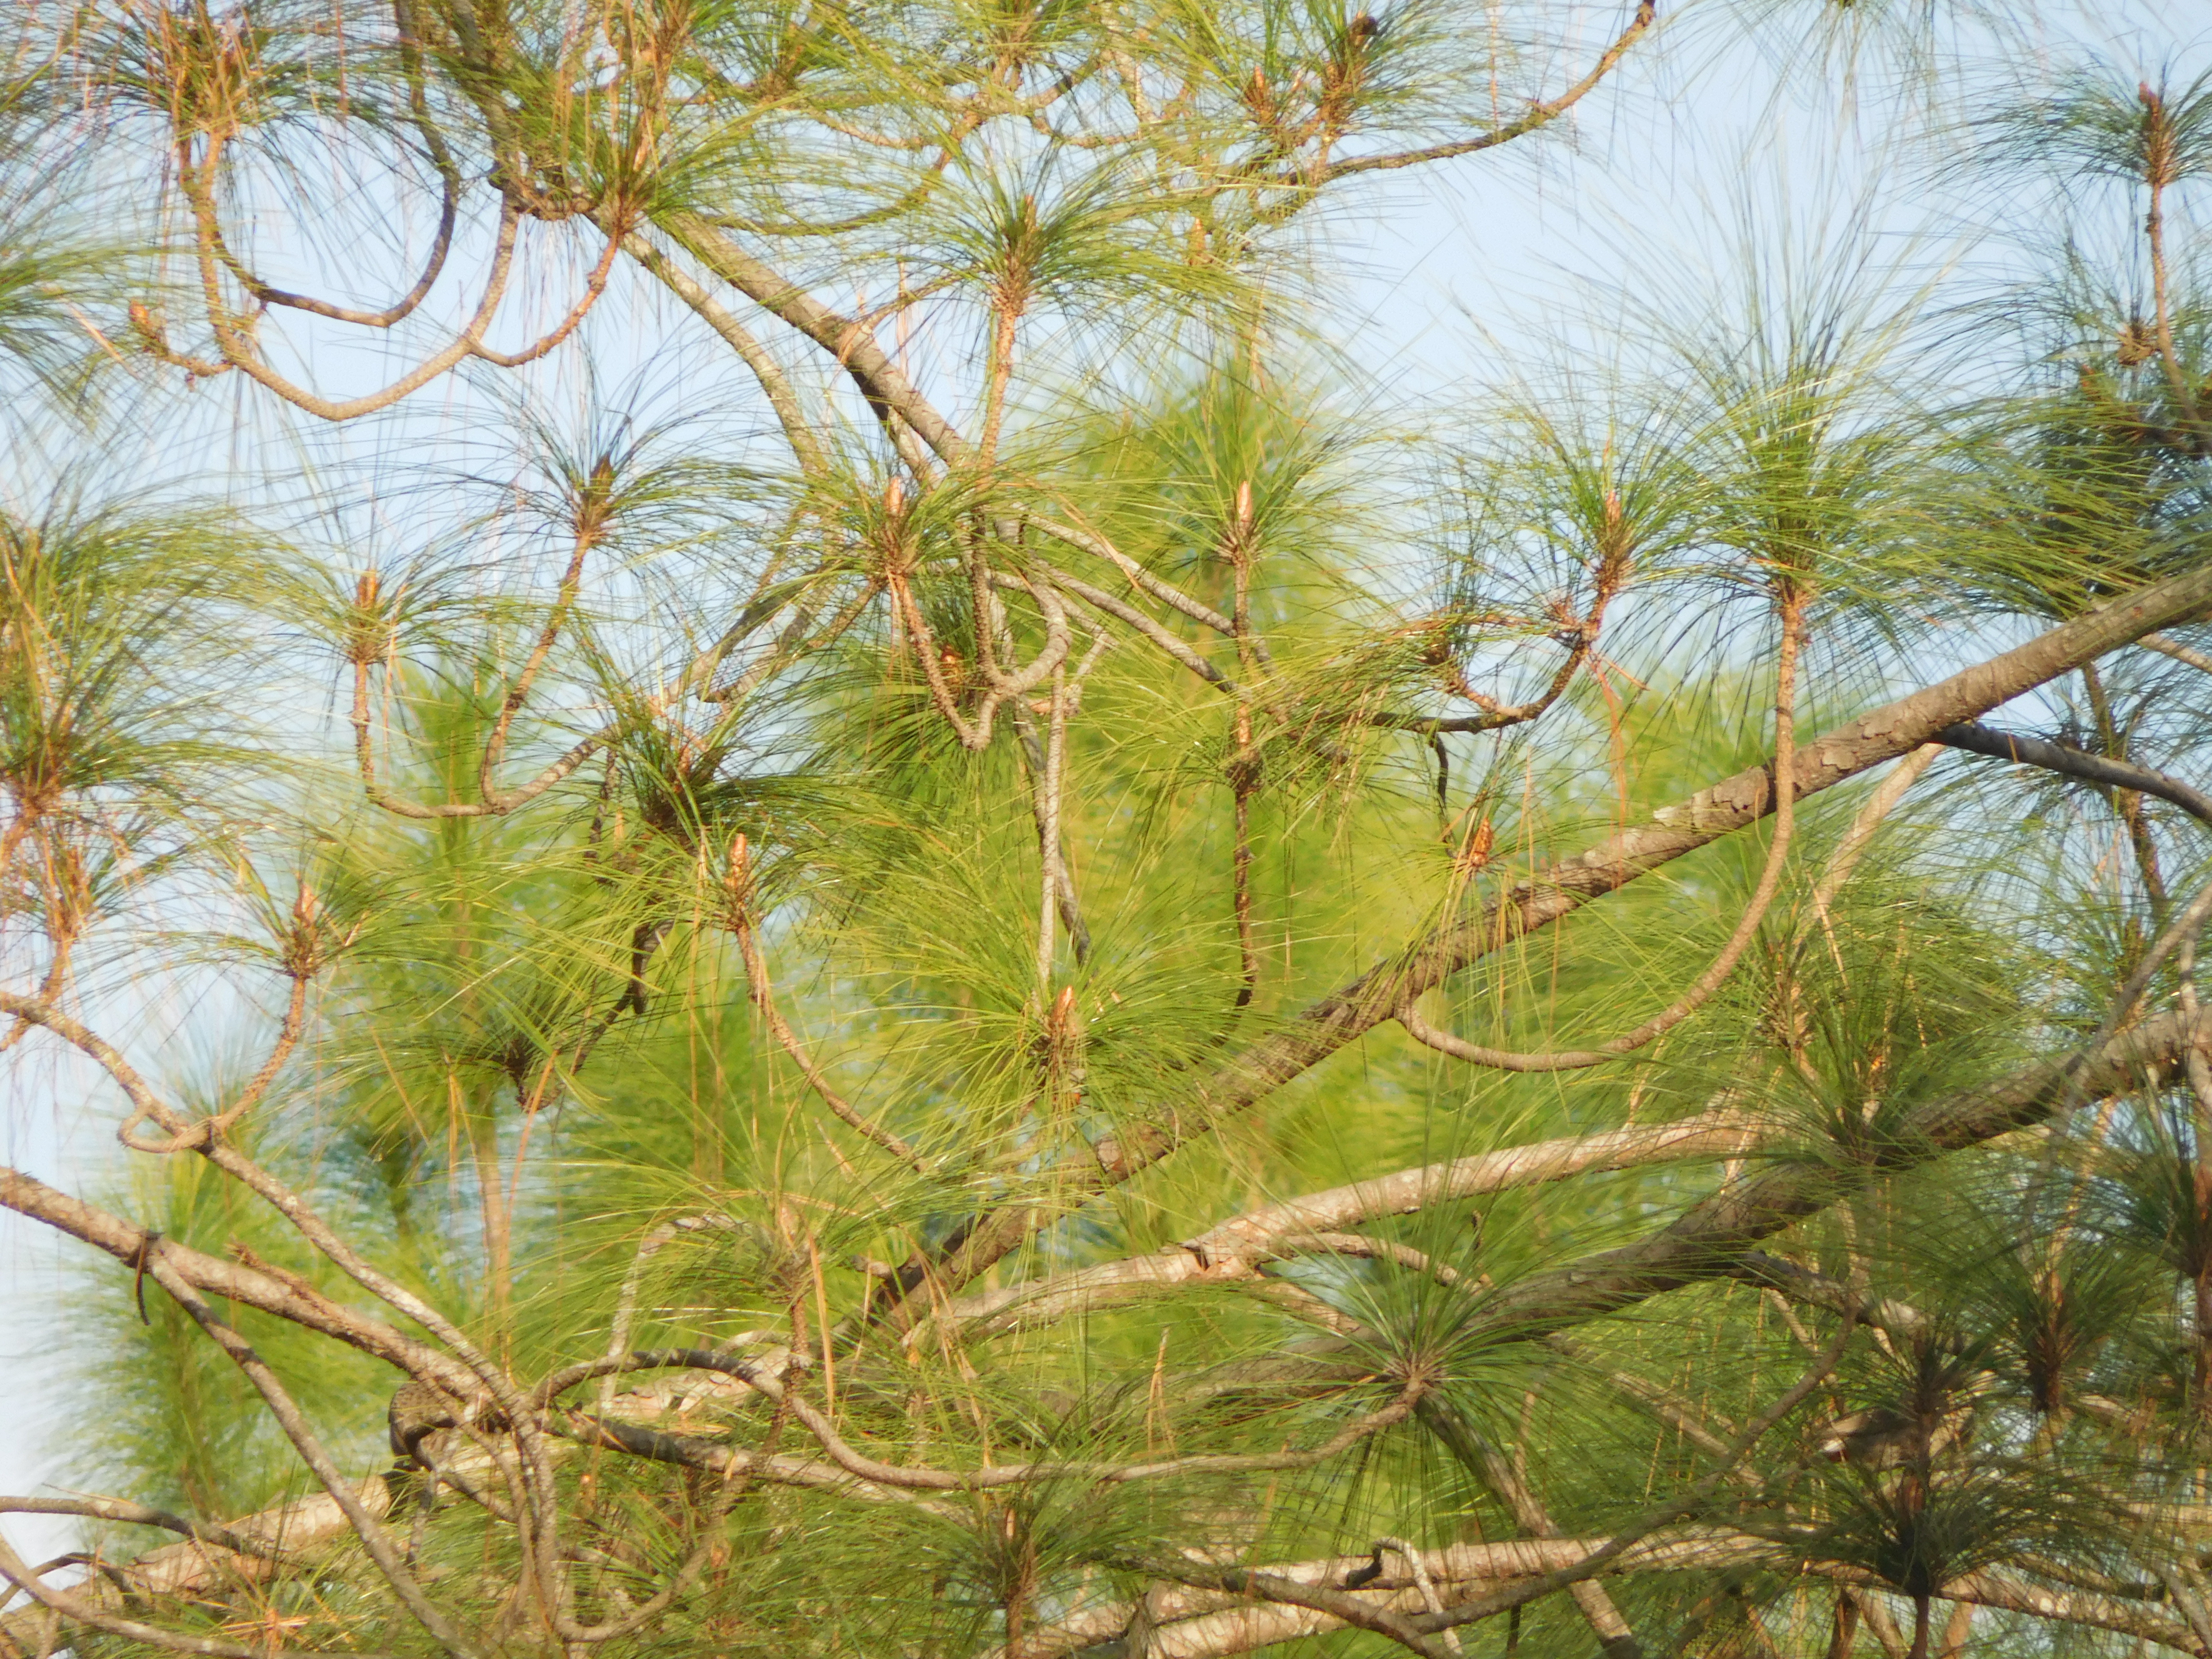 File:Branches of pine tree.jpg - Wikimedia Commons